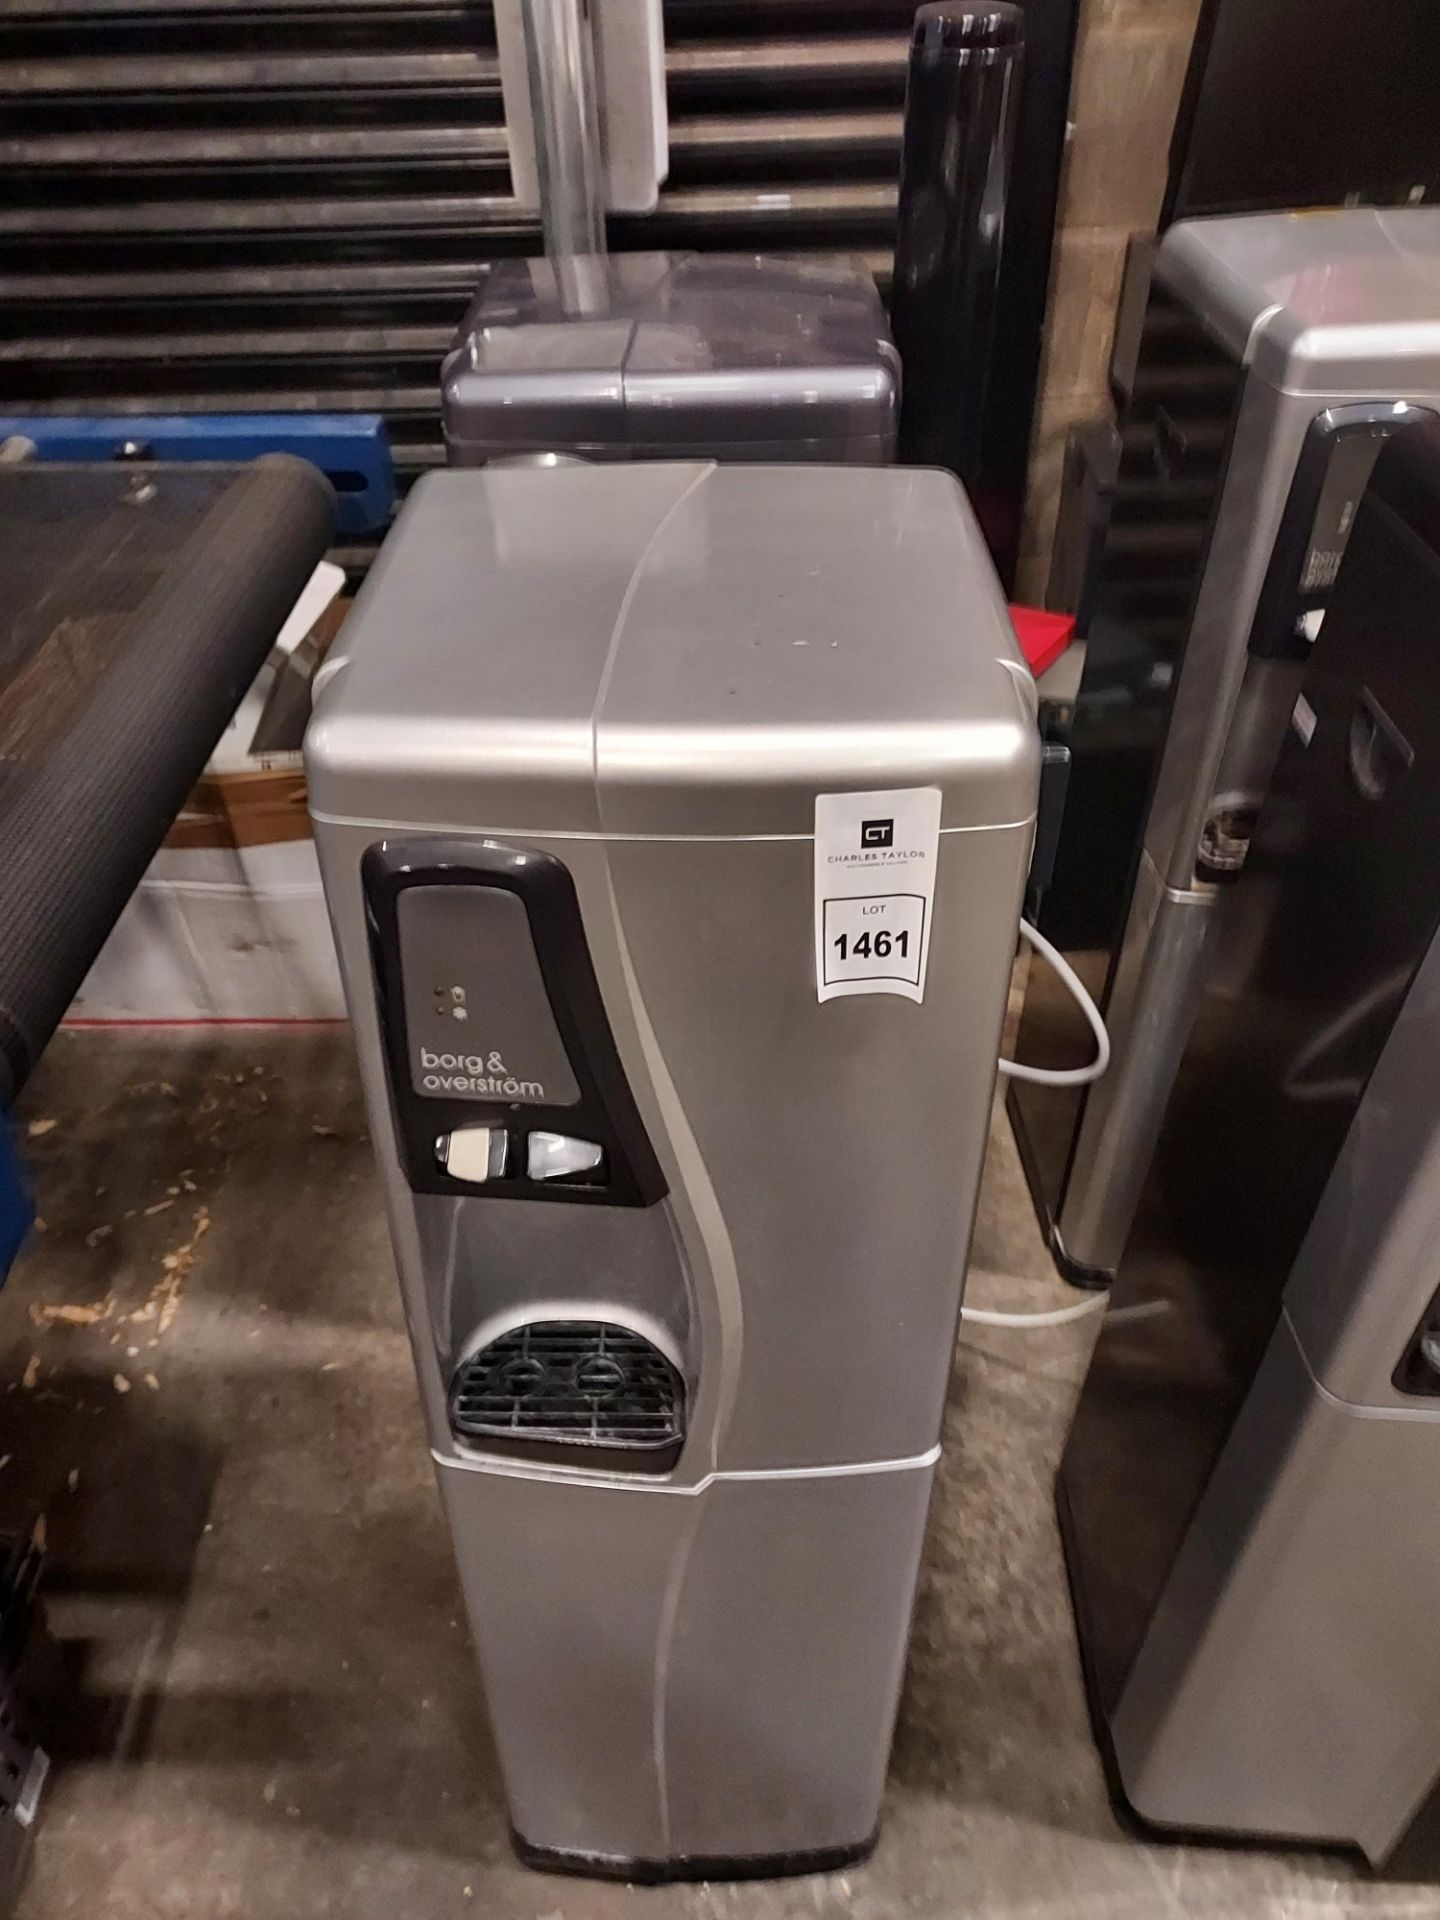 2 X BORG & OVERSTROM USED WATER DISPENSERS IN BLACK AND GREY